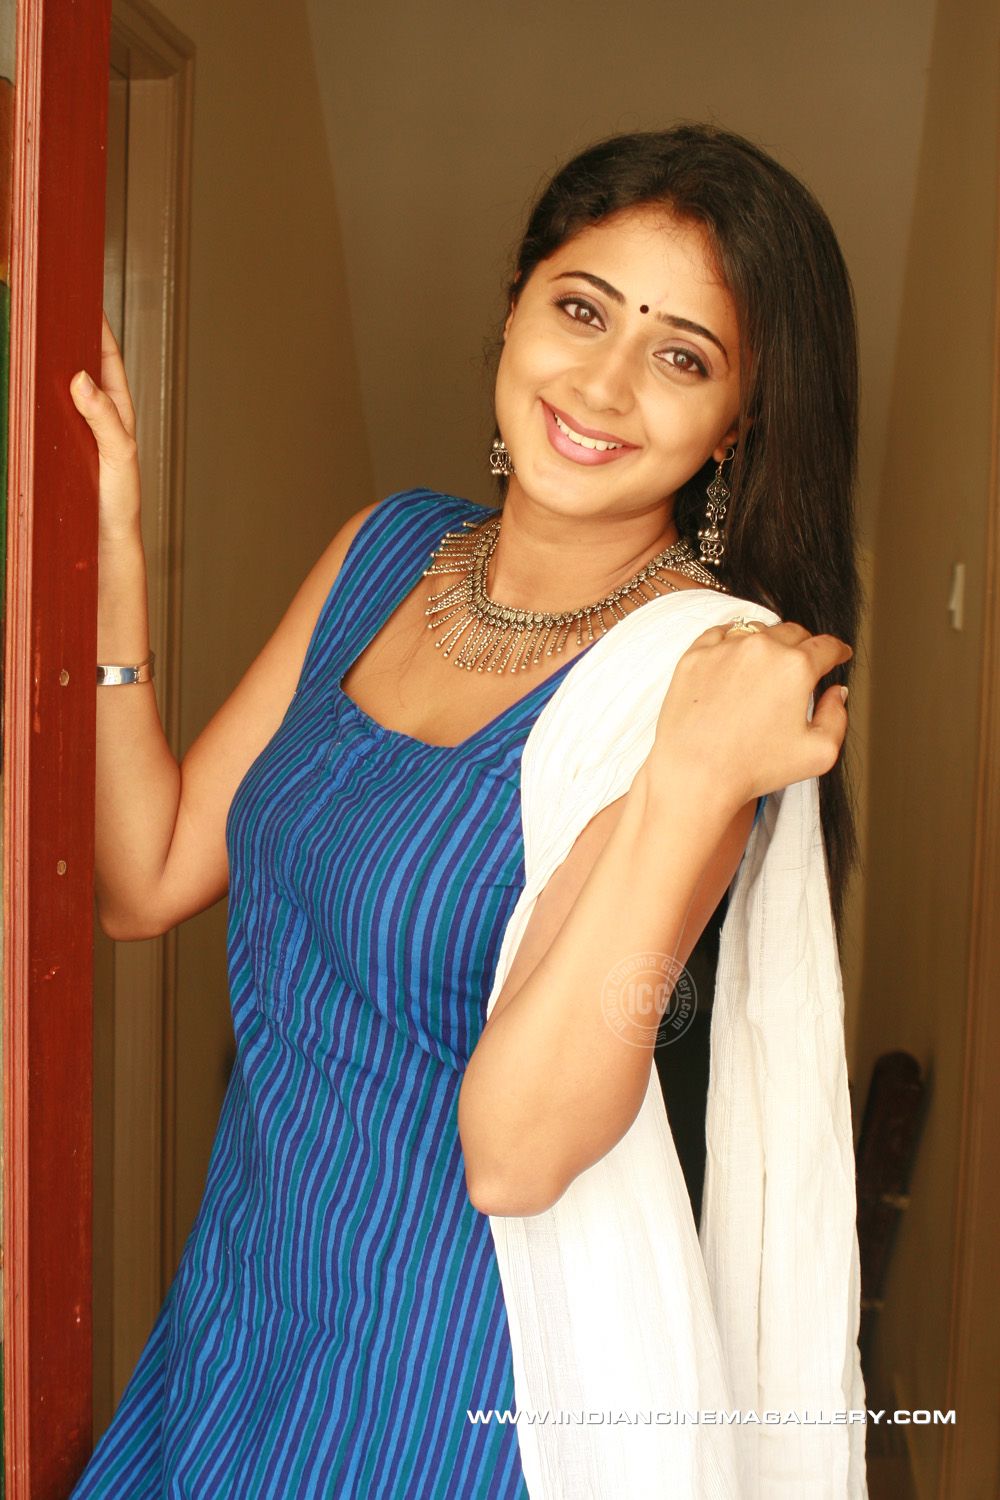 Kaniha Hot And Sexy Pictures Smile Beauty Kaniha Latest Pics 